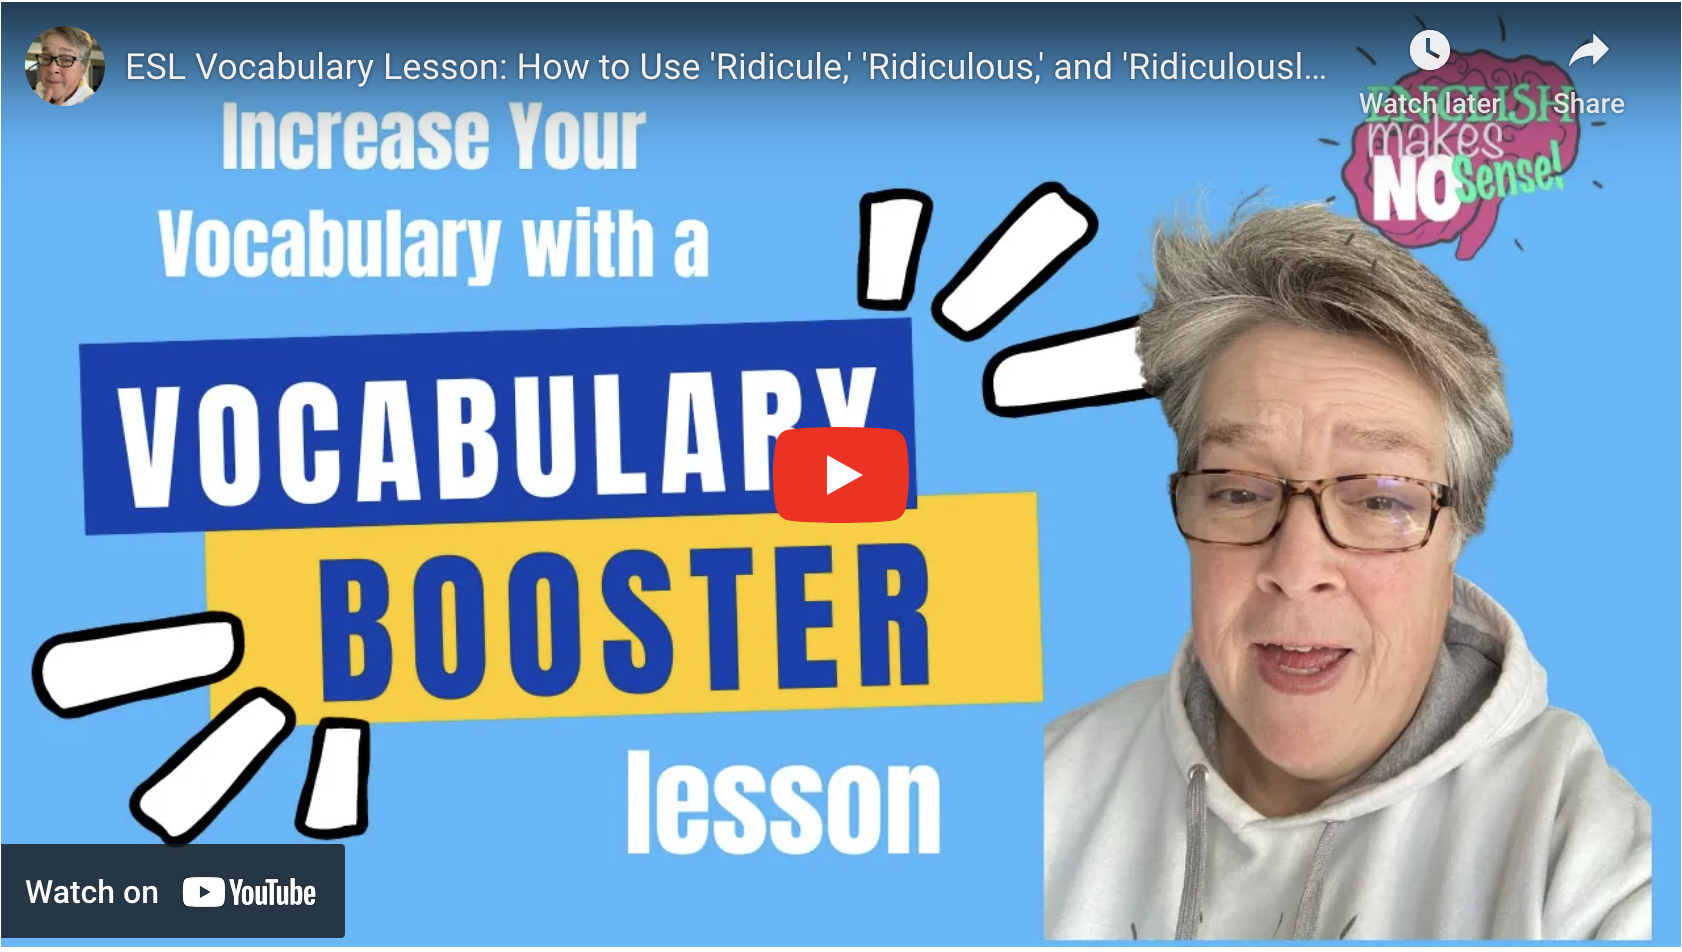 Increase yuor vocabulary with a vocabulary booster lesson